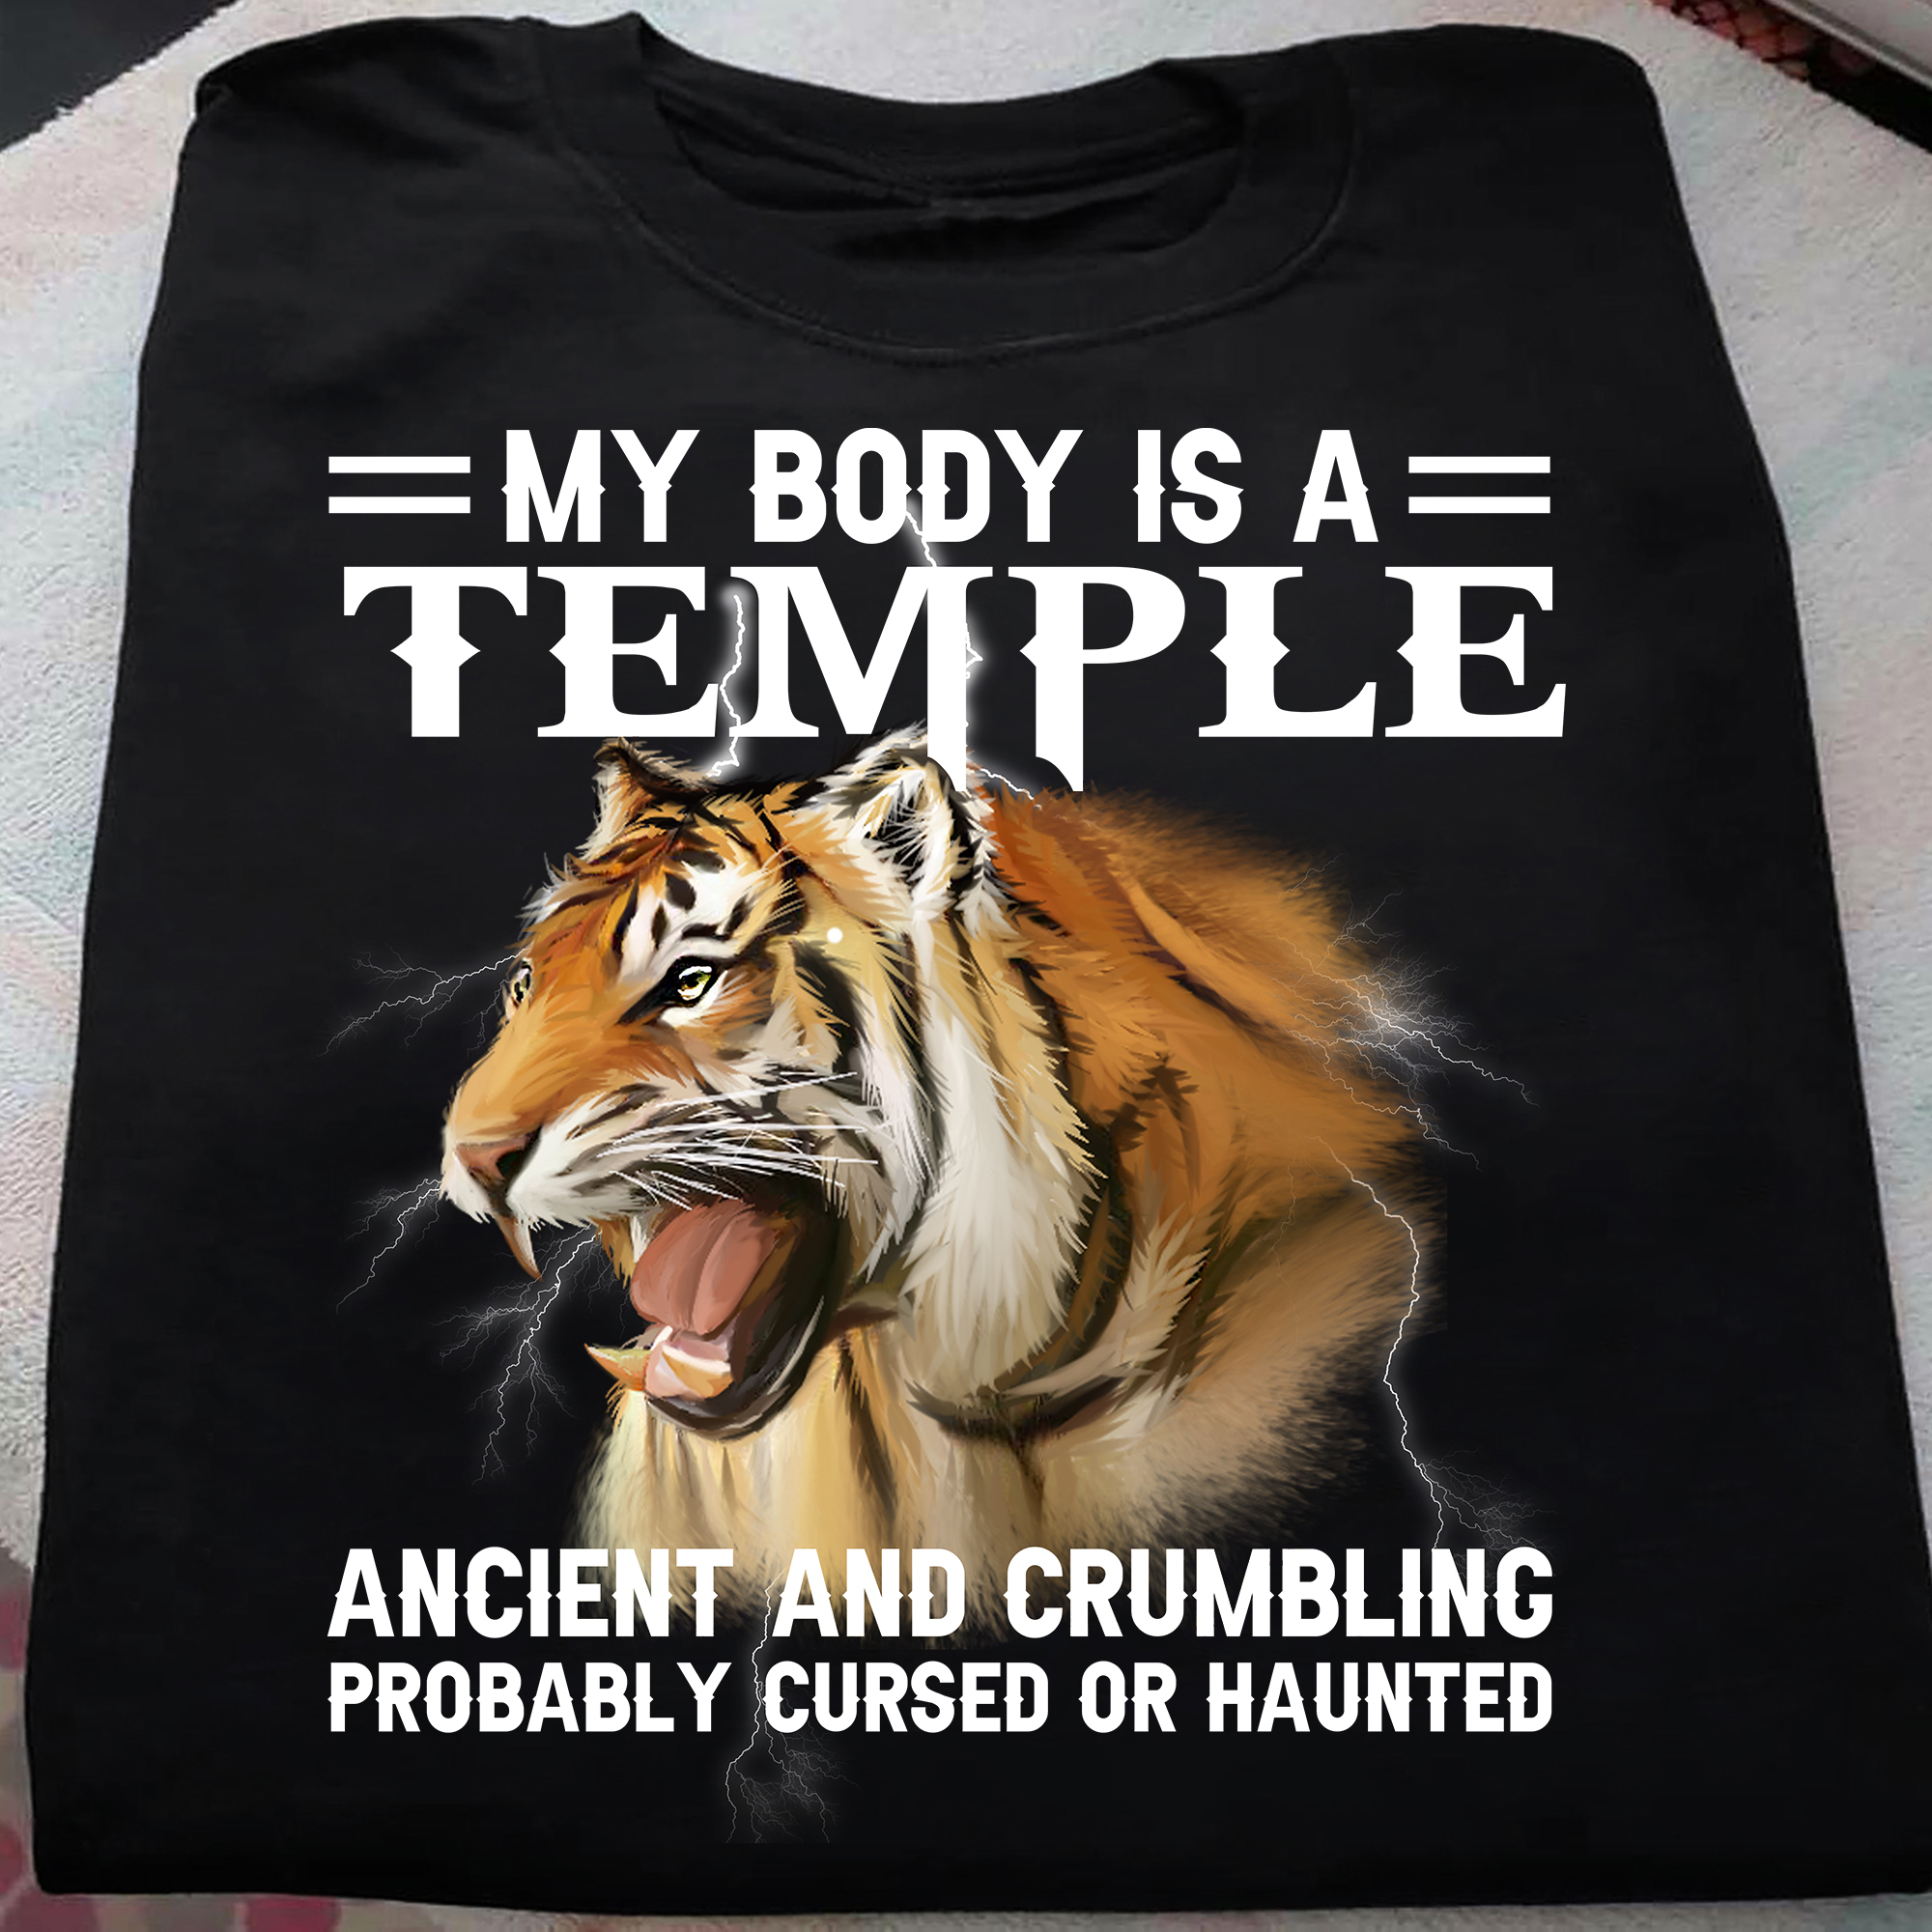 My body is a temple ancient and crumbling probably cursed or haunted - Grumpy tiger